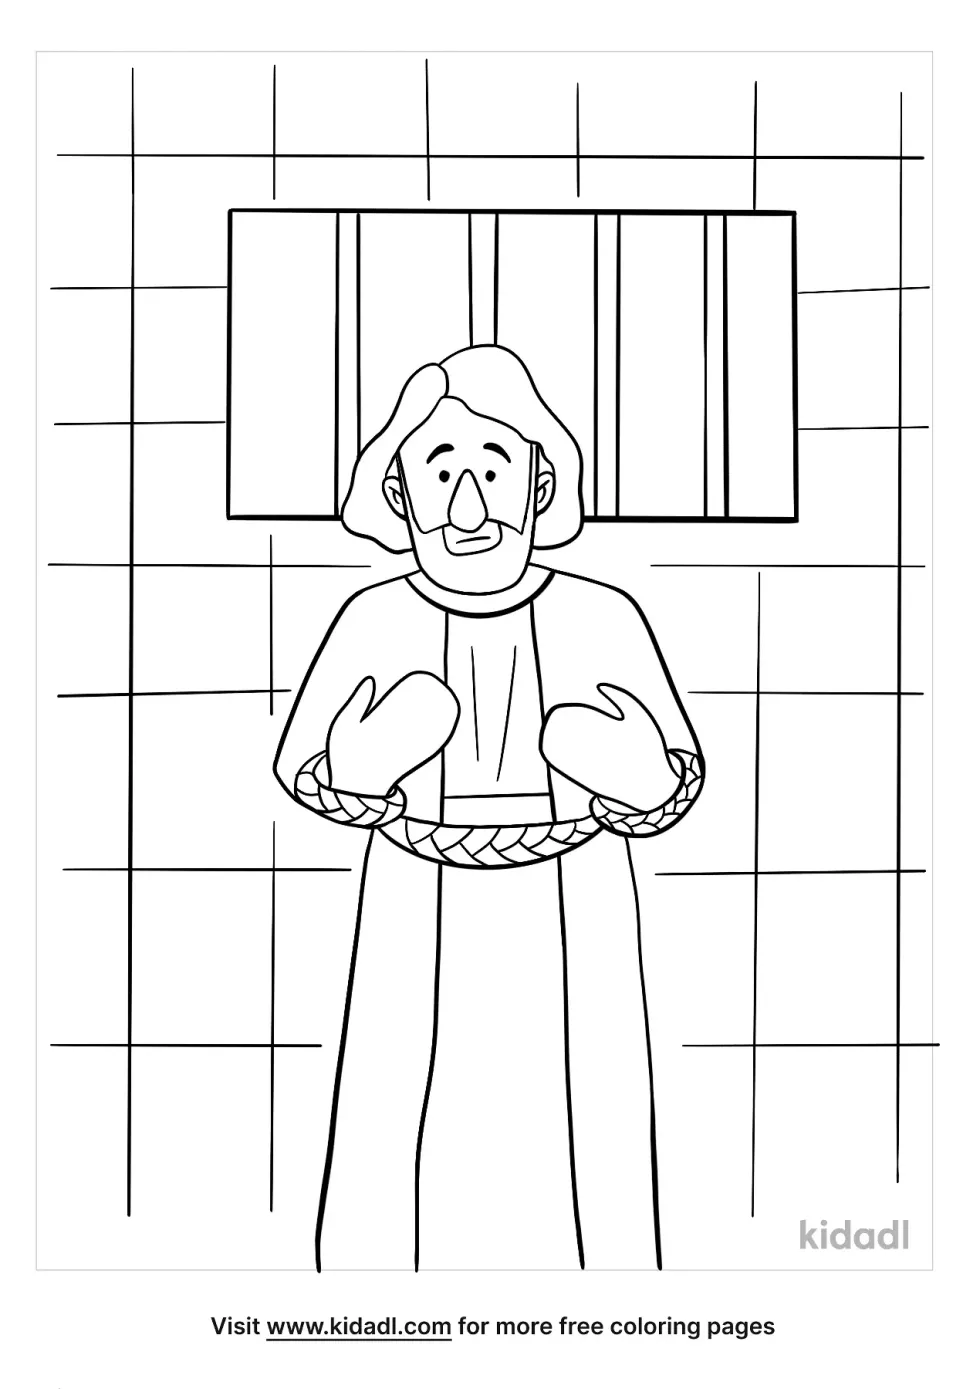 Peter In Jail Coloring Page